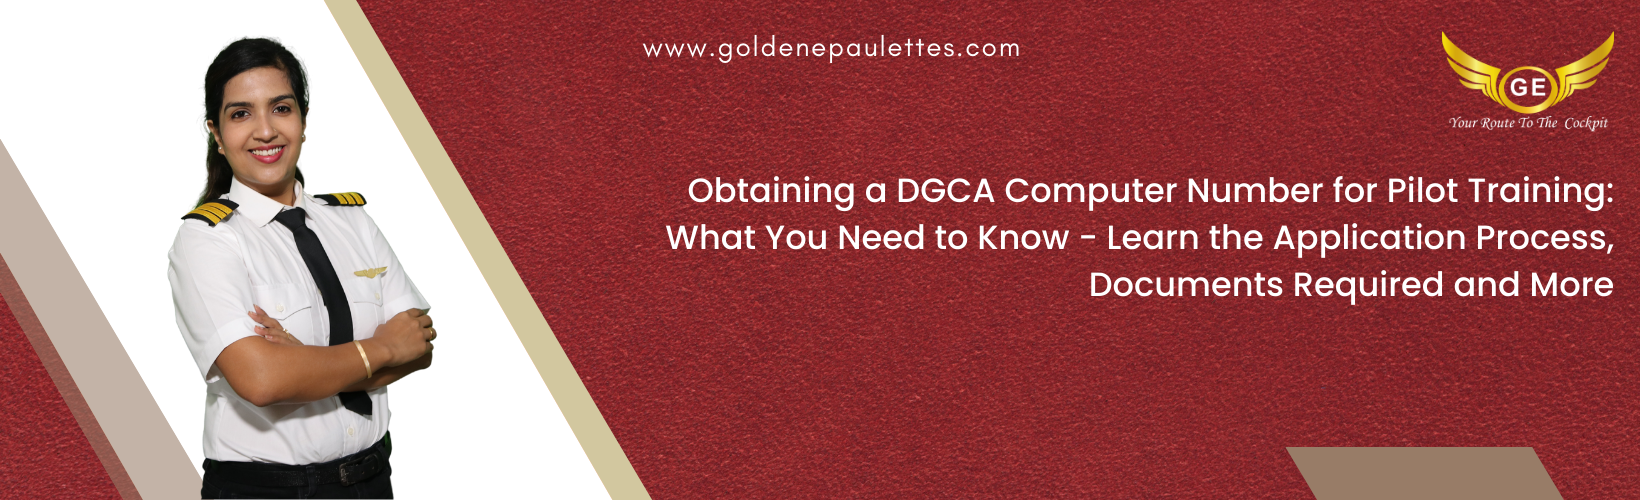 What You Need to Know About Obtaining a DGCA Computer Number for Pilot Training